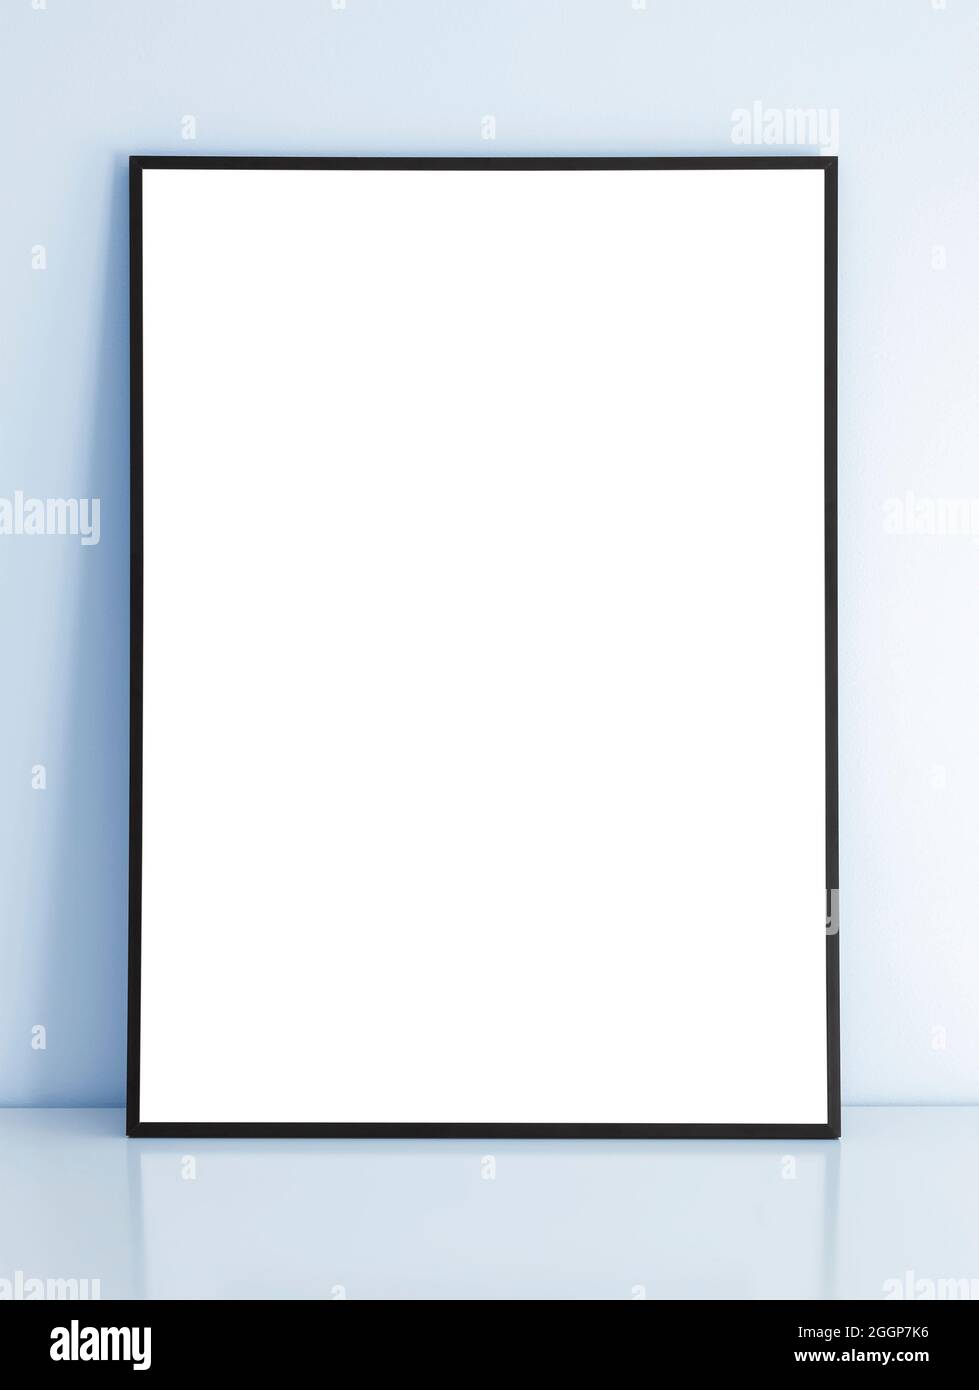 Thin black mock up frame on table with blue wall. Stock Photo